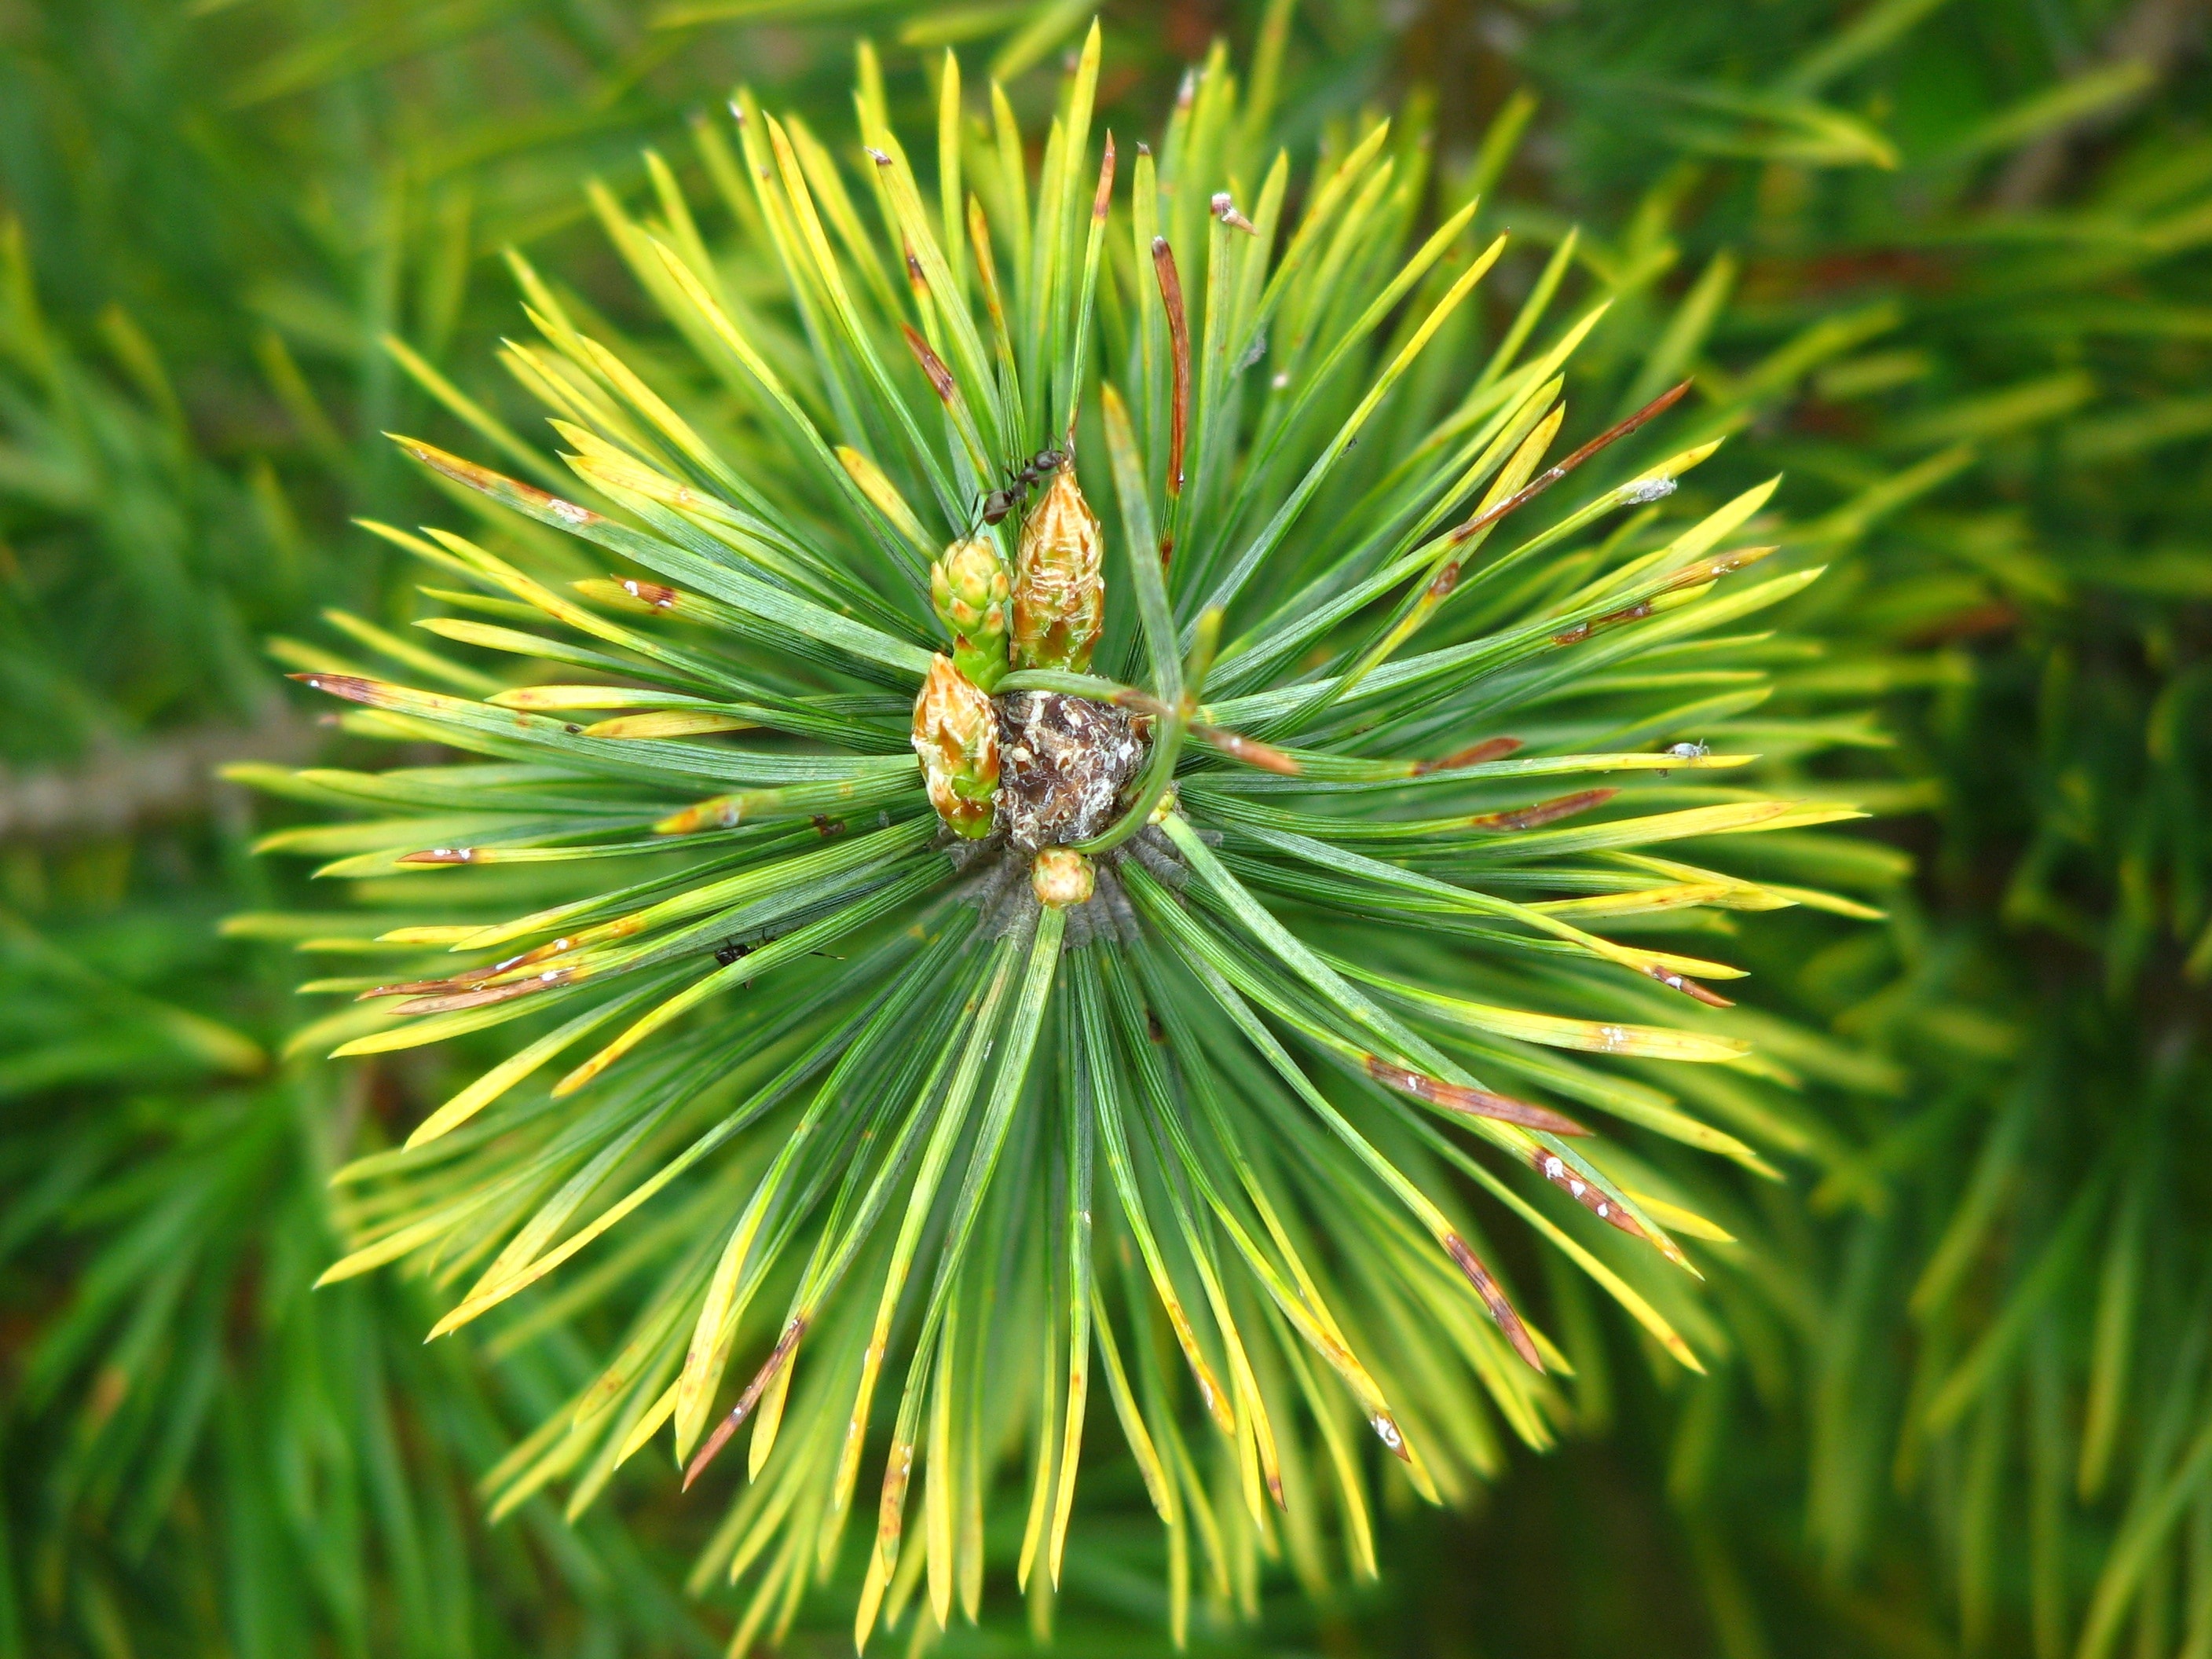 Needles, Pointed, Pine, Green, Forest, green color, nature